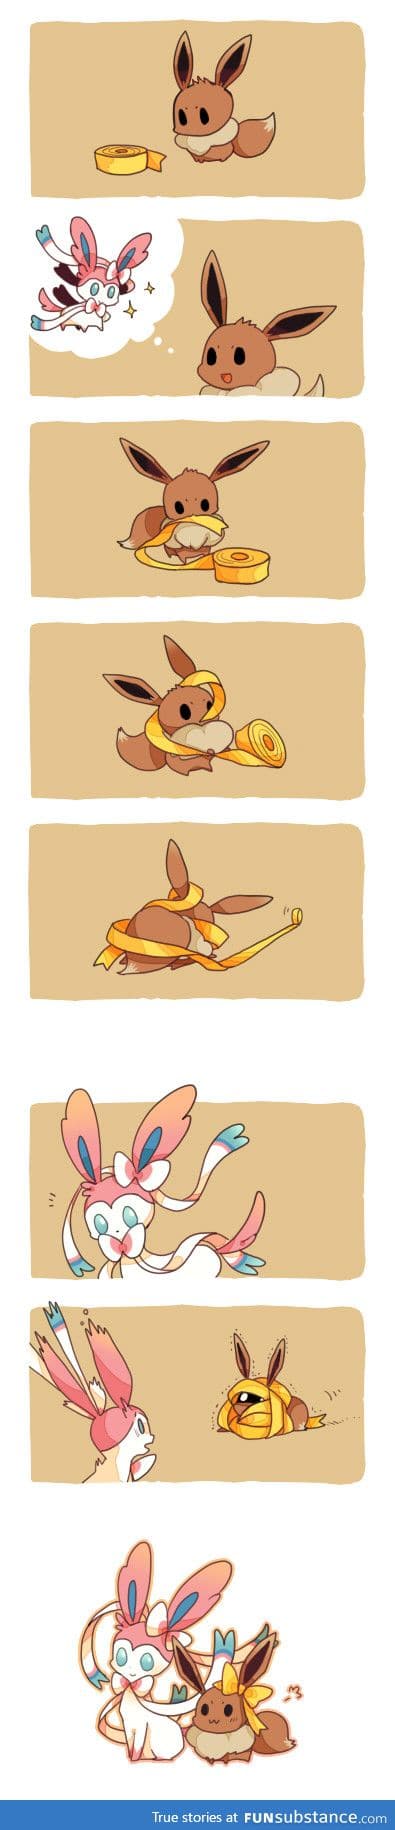 Eevee, your cuteness game knows no bounds